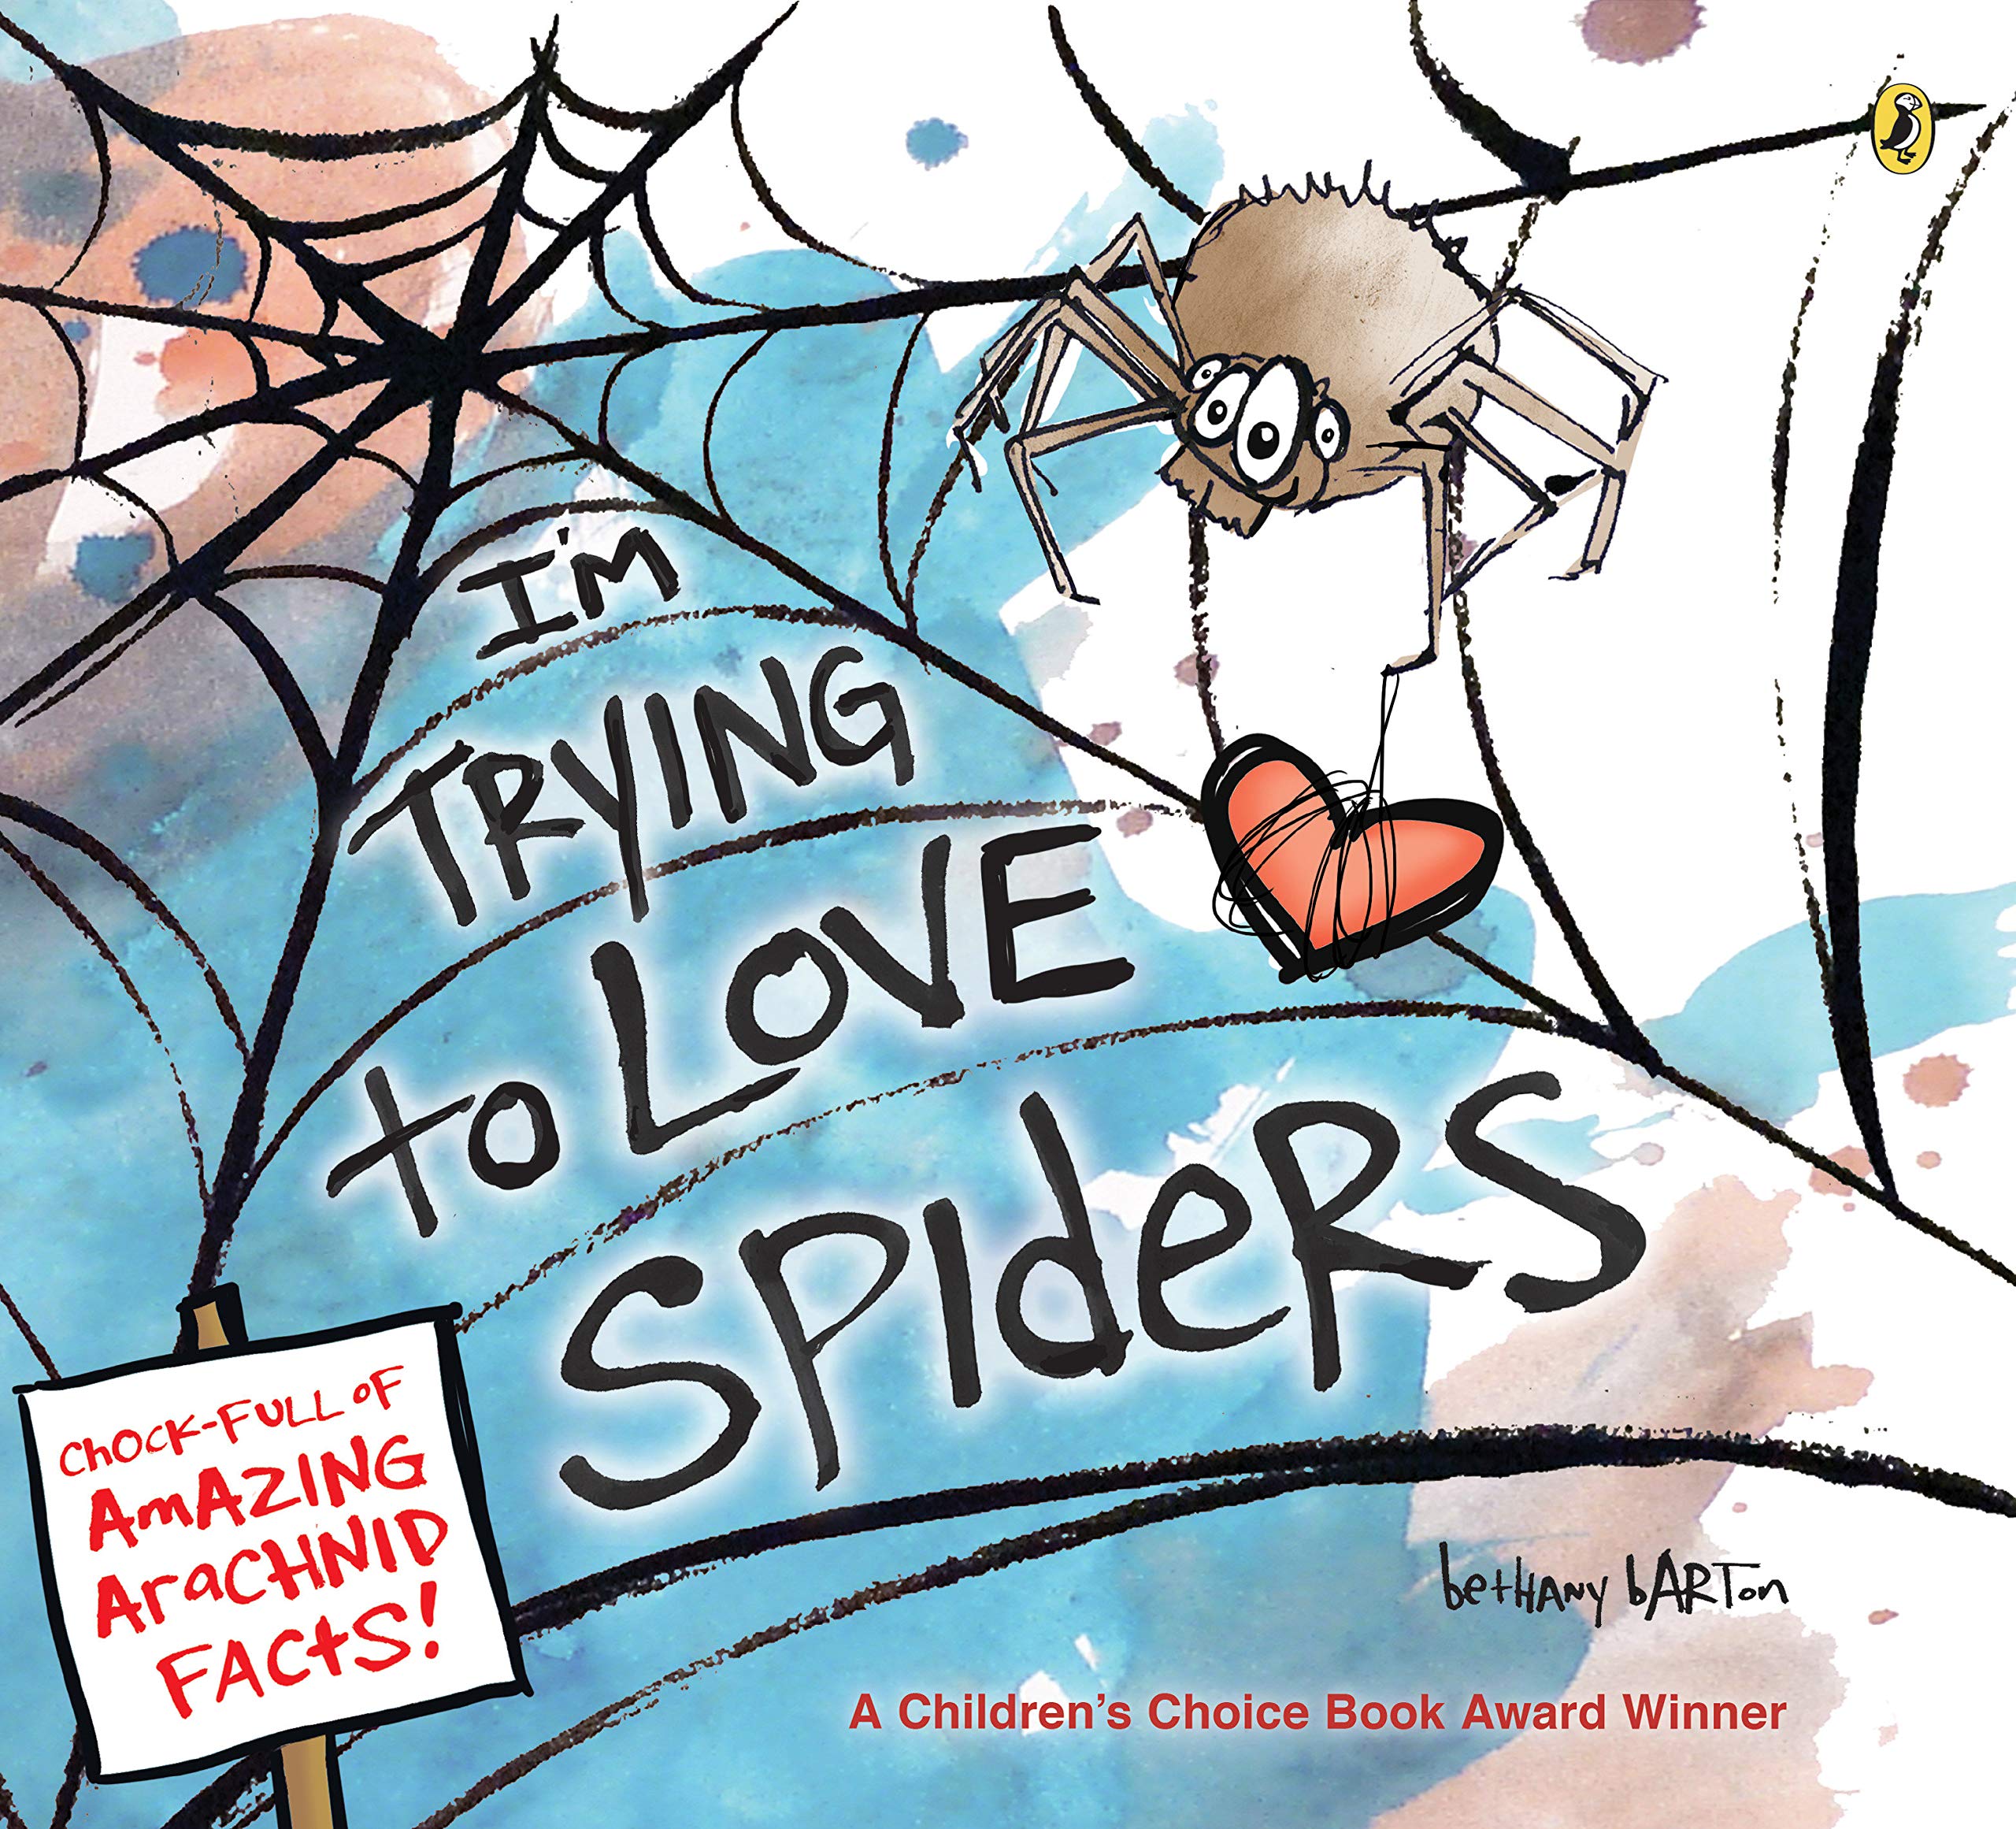 speech and language teaching concepts for I'm Trying to Love Spiders in speech therapy​ ​